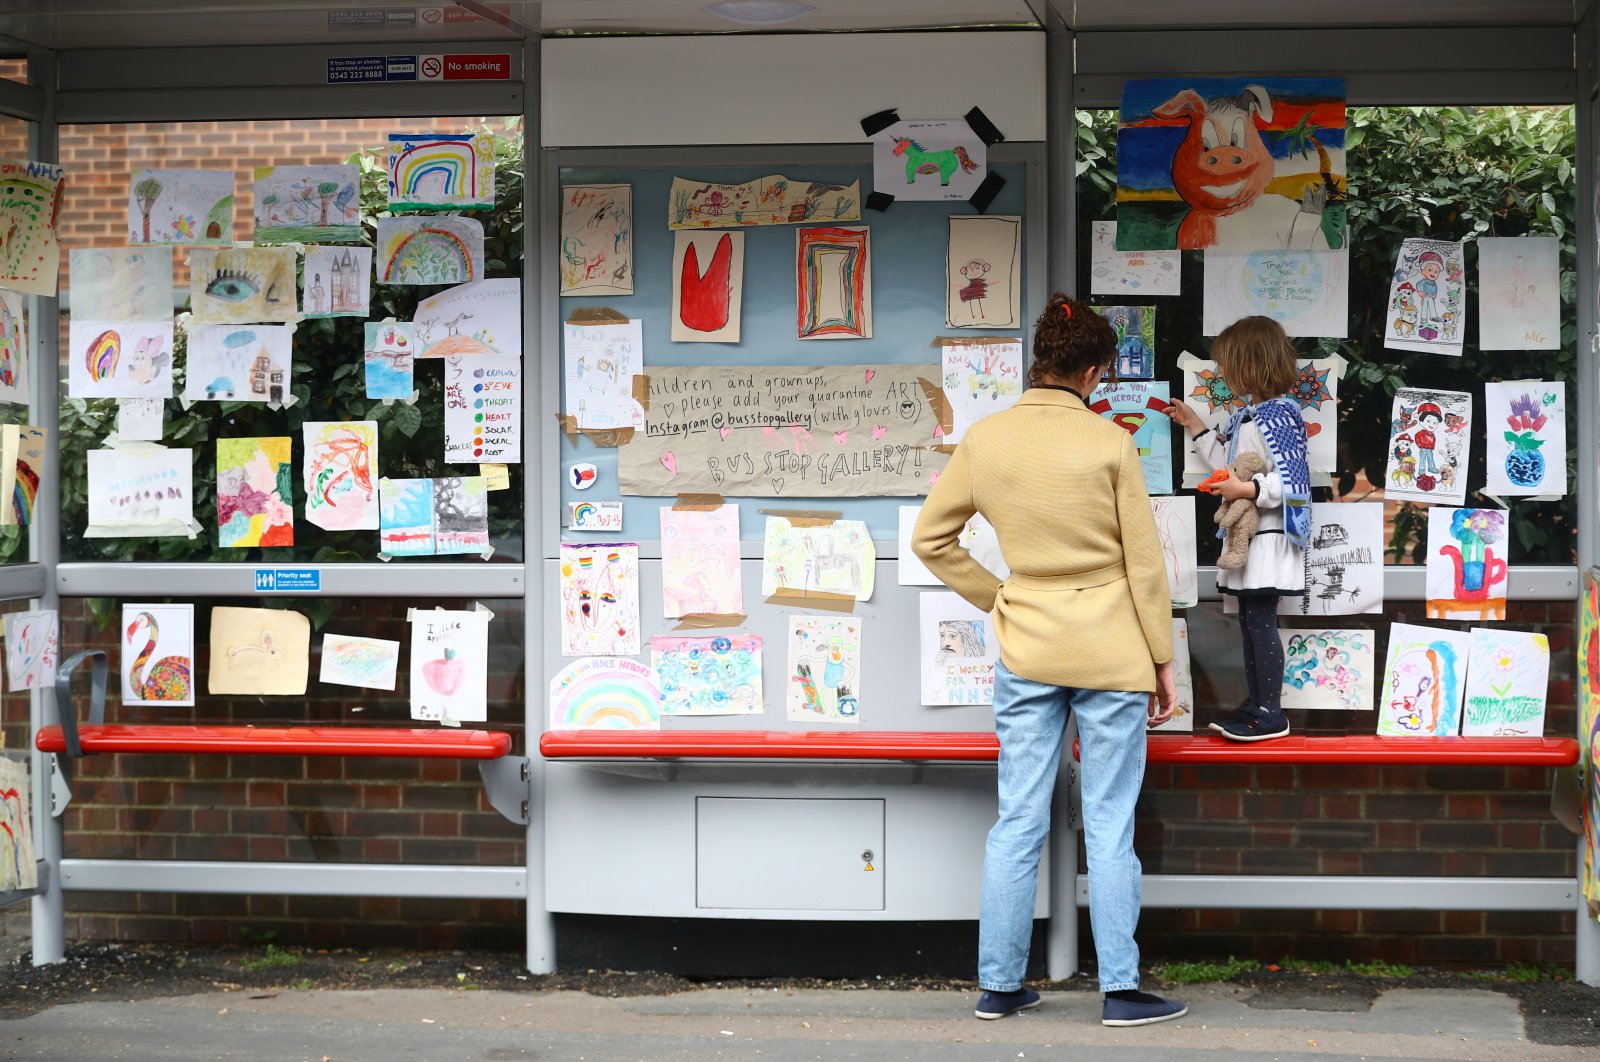 Sarah Lamarr and her 4-year-old daughter, Rosie, who started a "bus stop gallery" look at artwork at the bus stop following the outbreak of the coronavirus, London, Britain, April 27, 2020. (Reuters Photo)